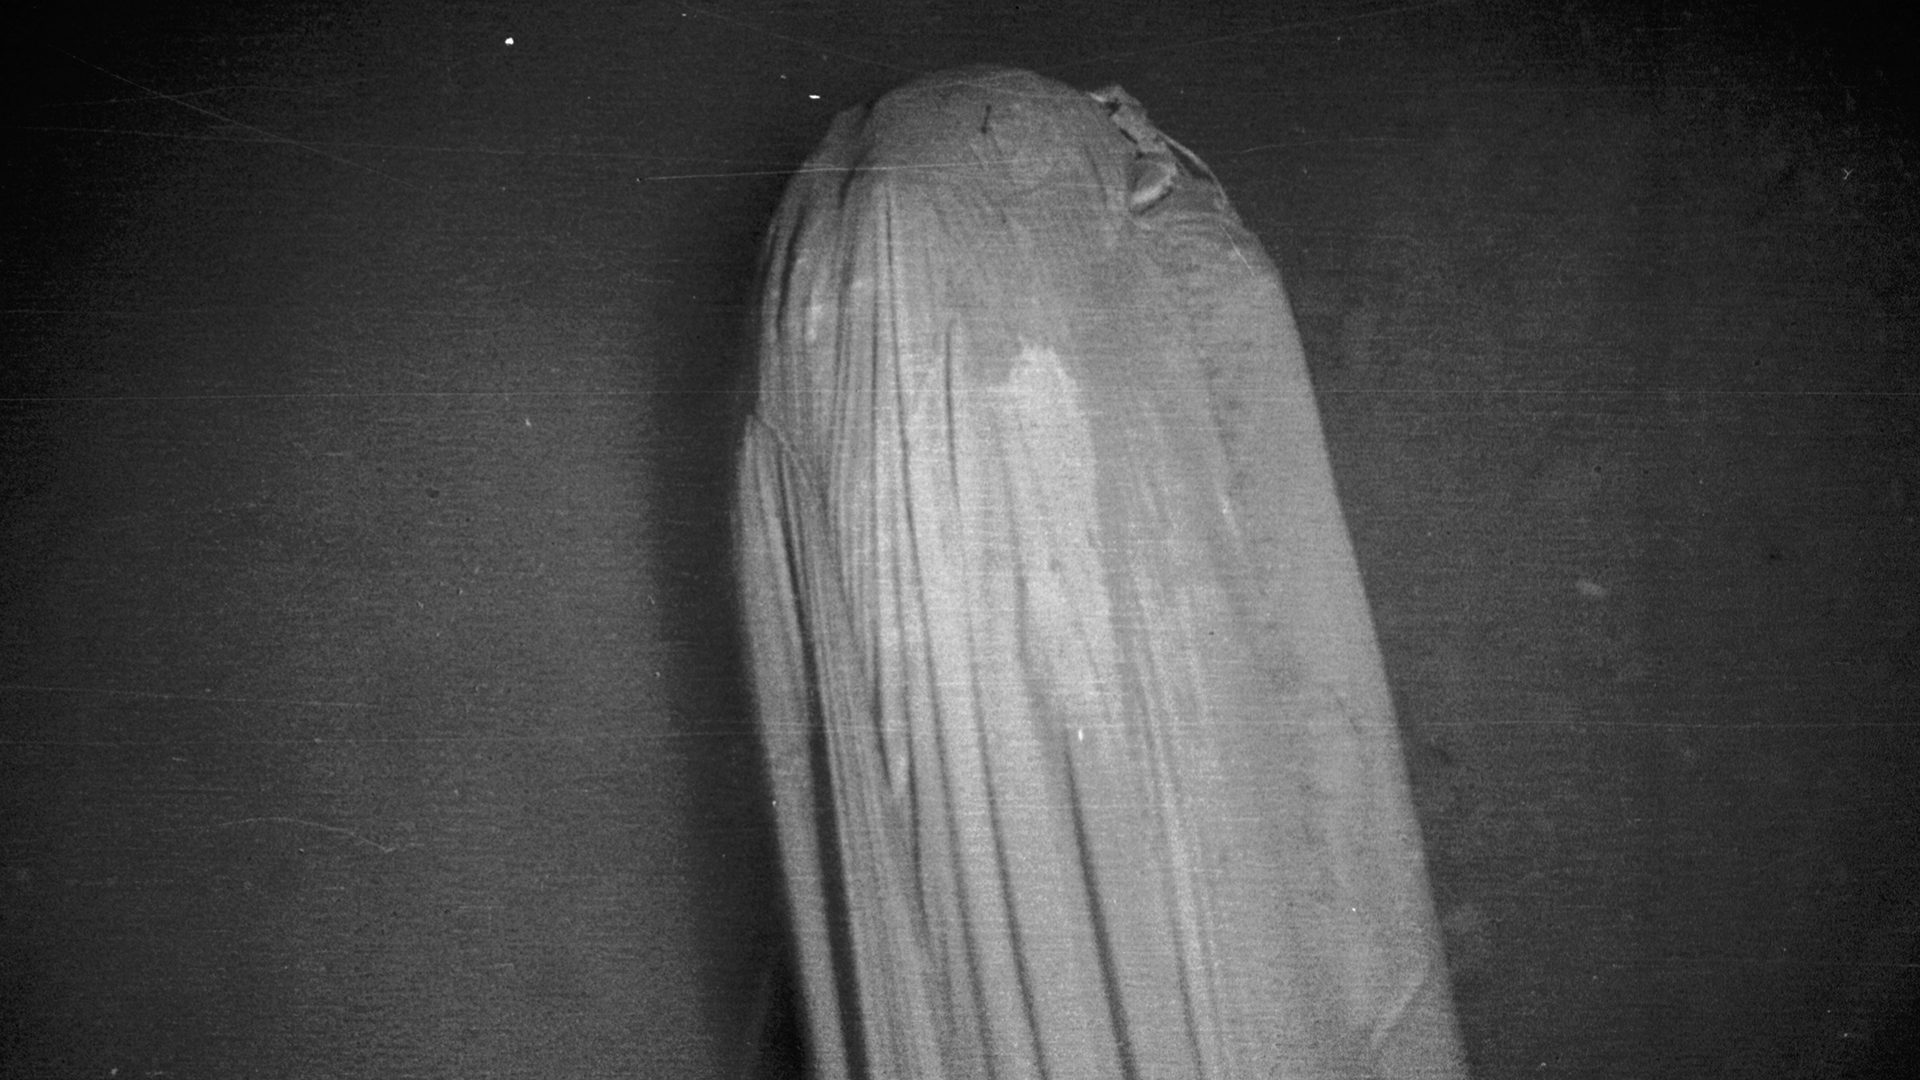 Alvin’s first glimpse at the lost H-bomb on the seafloor, covered by its parachute. (Photo courtesy of WHOI Archives, © Woods Hole Oceanographic Institution)